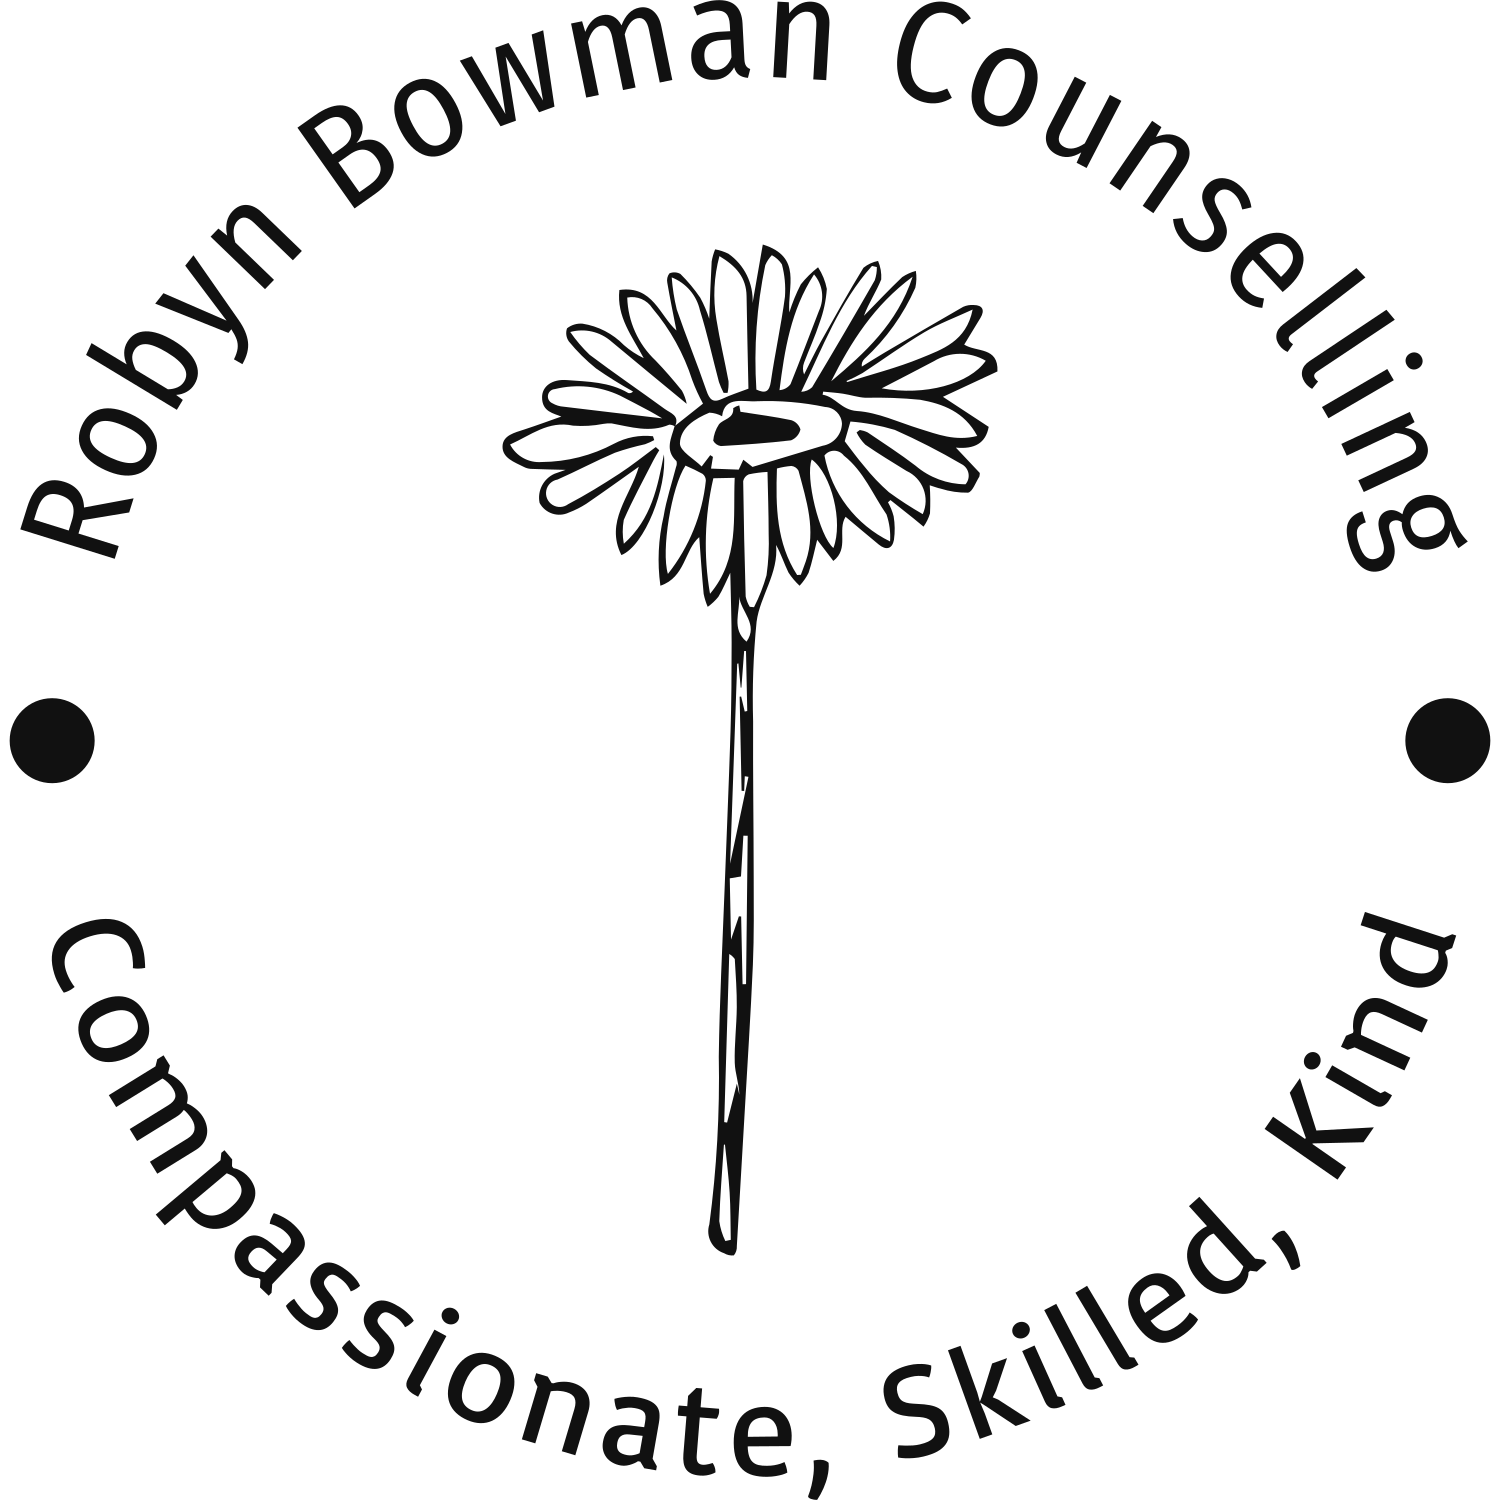 Robyn Bowman Counselling